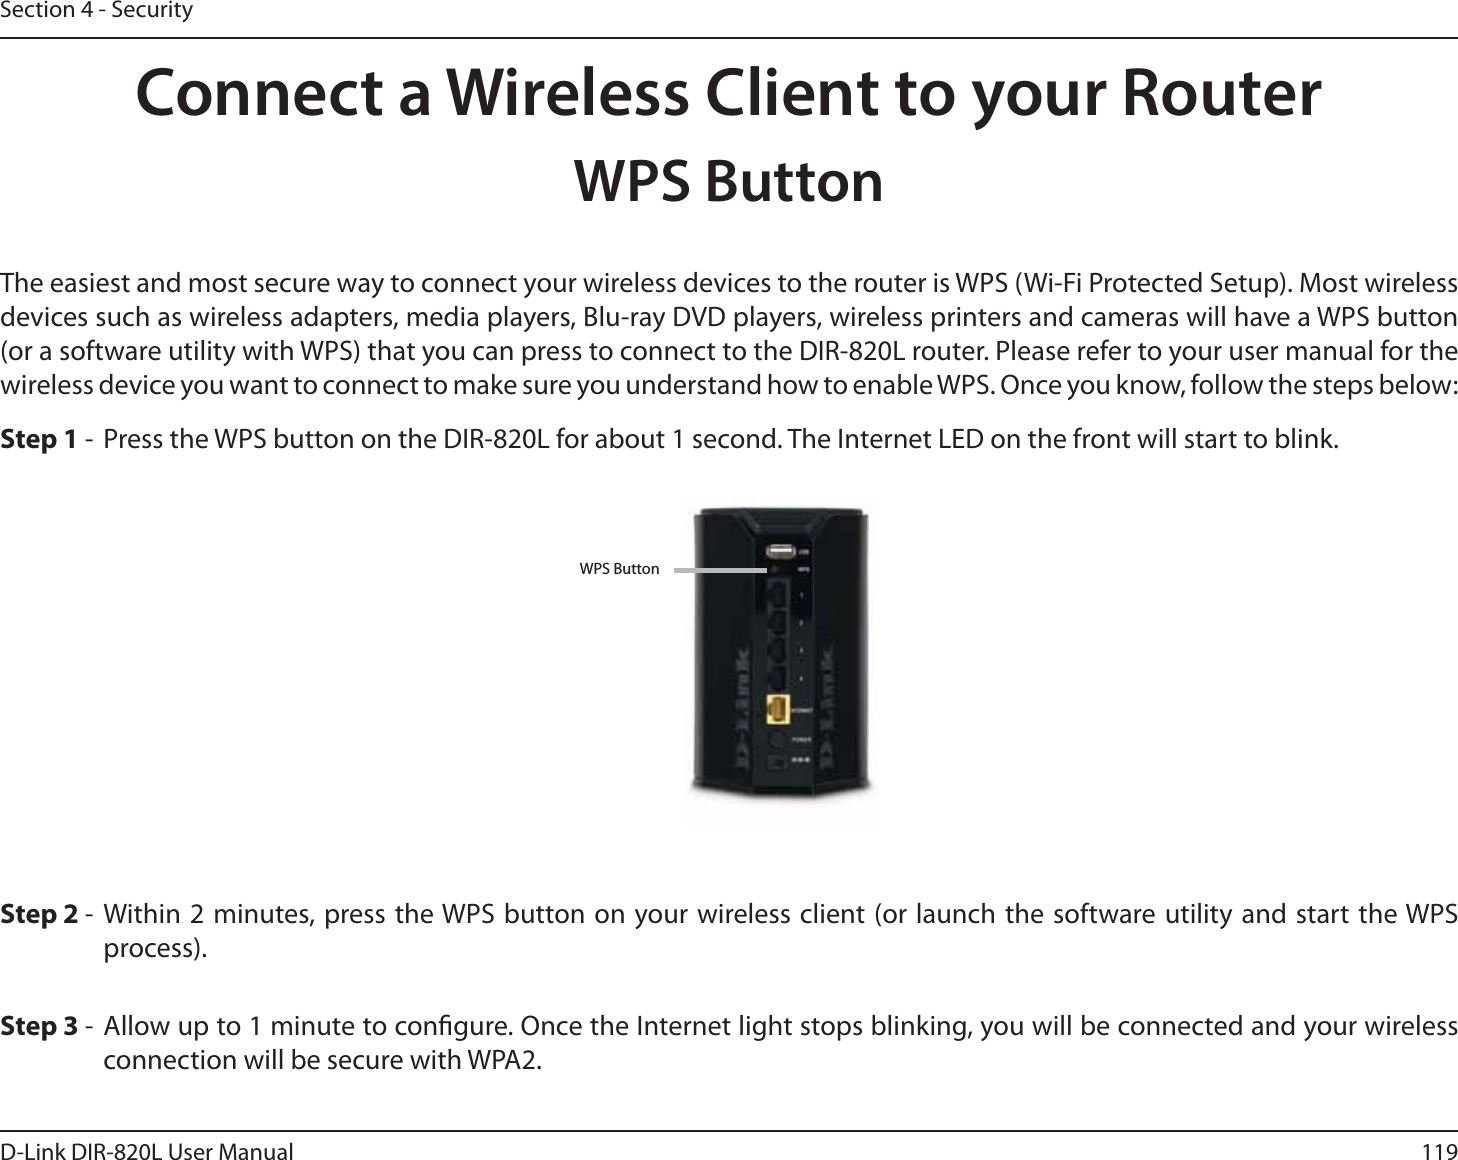 119D-Link DIR-820L User ManualSection 4 - SecurityConnect a Wireless Client to your RouterWPS ButtonStep 2 - Within 2 minutes, press the WPS button on your wireless client (or launch the software utility and start the WPS process).The easiest and most secure way to connect your wireless devices to the router is WPS (Wi-Fi Protected Setup). Most wireless devices such as wireless adapters, media players, Blu-ray DVD players, wireless printers and cameras will have a WPS button (or a software utility with WPS) that you can press to connect to the DIR-820L router. Please refer to your user manual for the wireless device you want to connect to make sure you understand how to enable WPS. Once you know, follow the steps below:Step 1 -  Press the WPS button on the DIR-820L for about 1 second. The Internet LED on the front will start to blink.Step 3 - Allow up to 1 minute to congure. Once the Internet light stops blinking, you will be connected and your wireless connection will be secure with WPA2.WPS Button